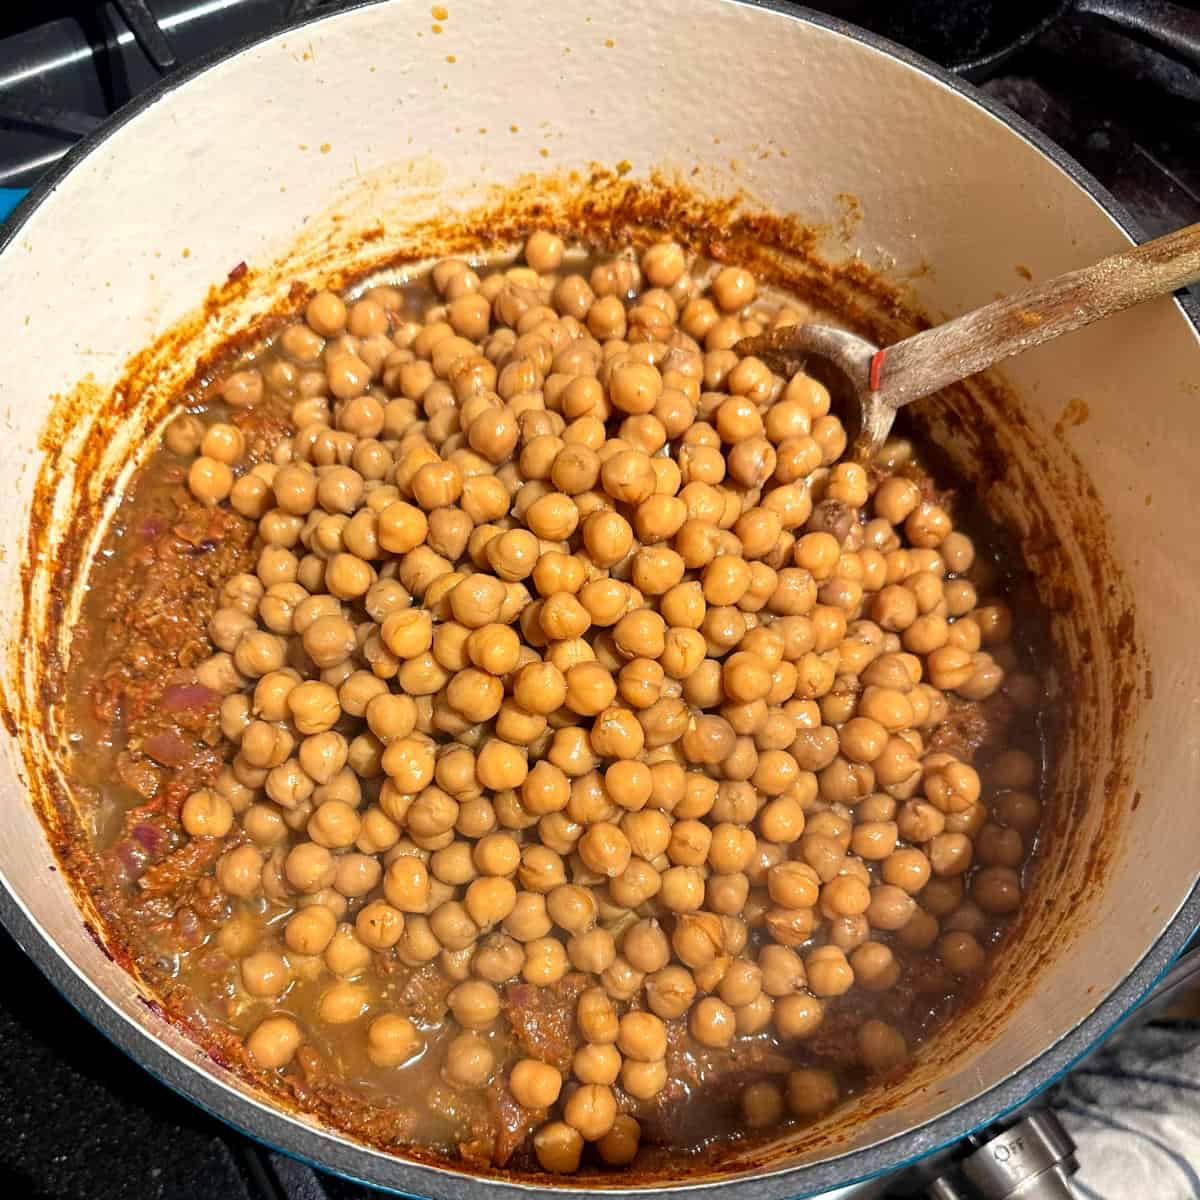 Chickpeas added to tomatoes and onions.